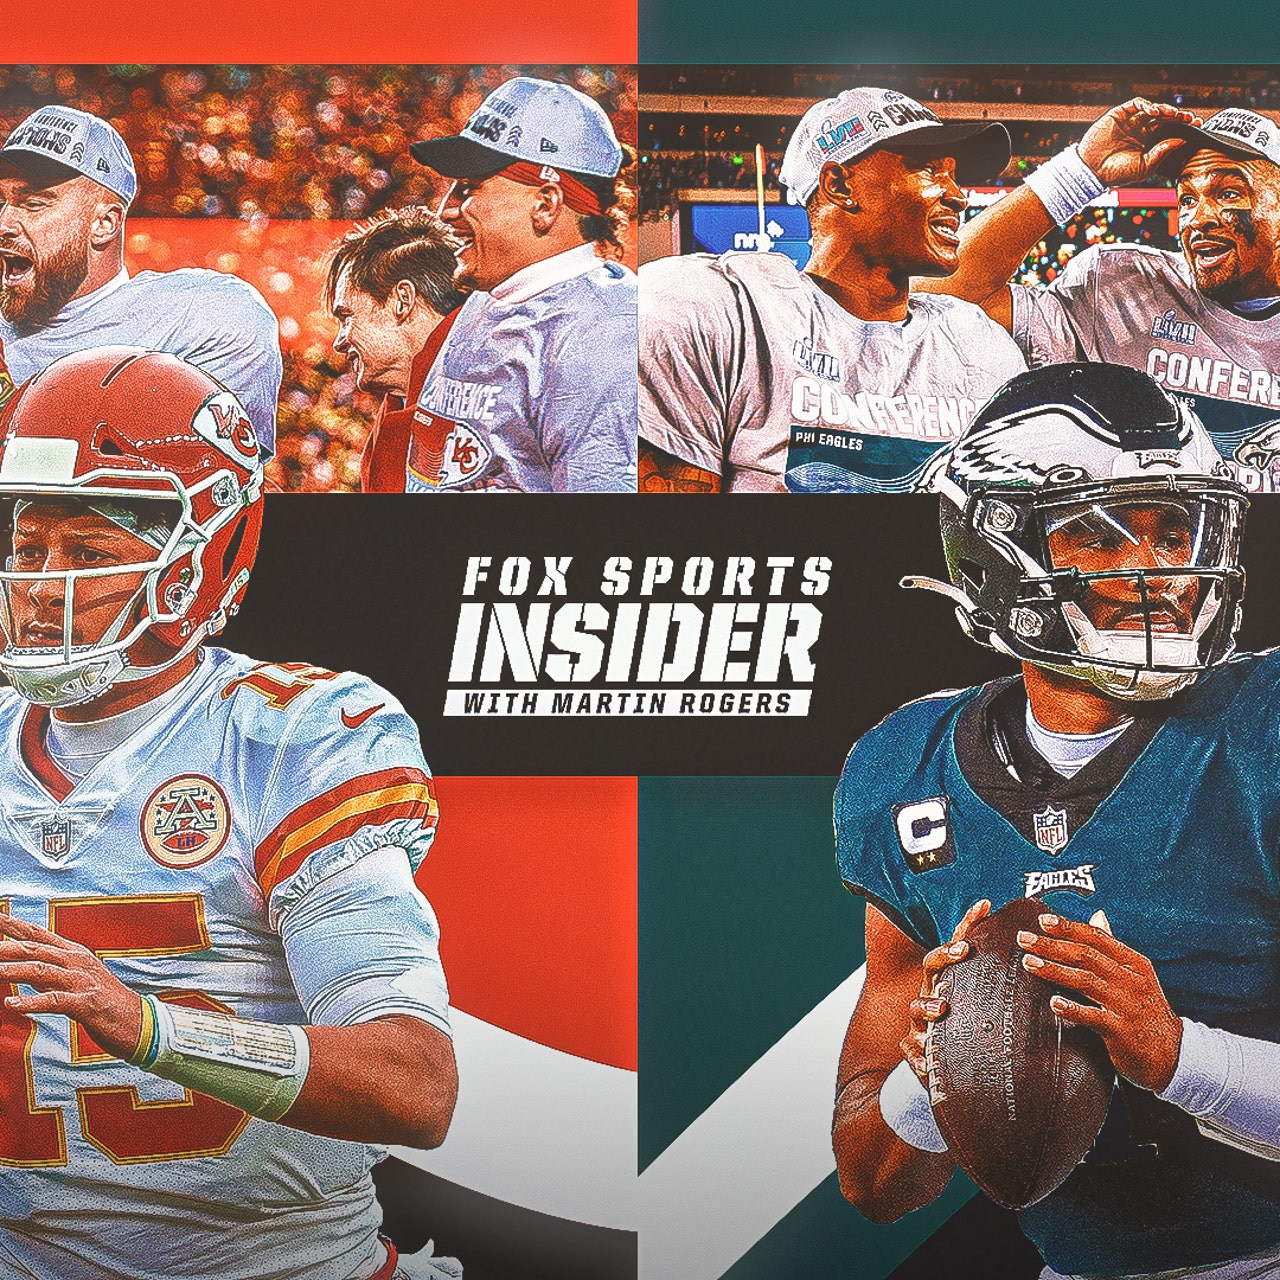 Chiefs-Jets Draws Biggest Sunday NFL Audience Since Last Season's Super Bowl, Sports Illustrated